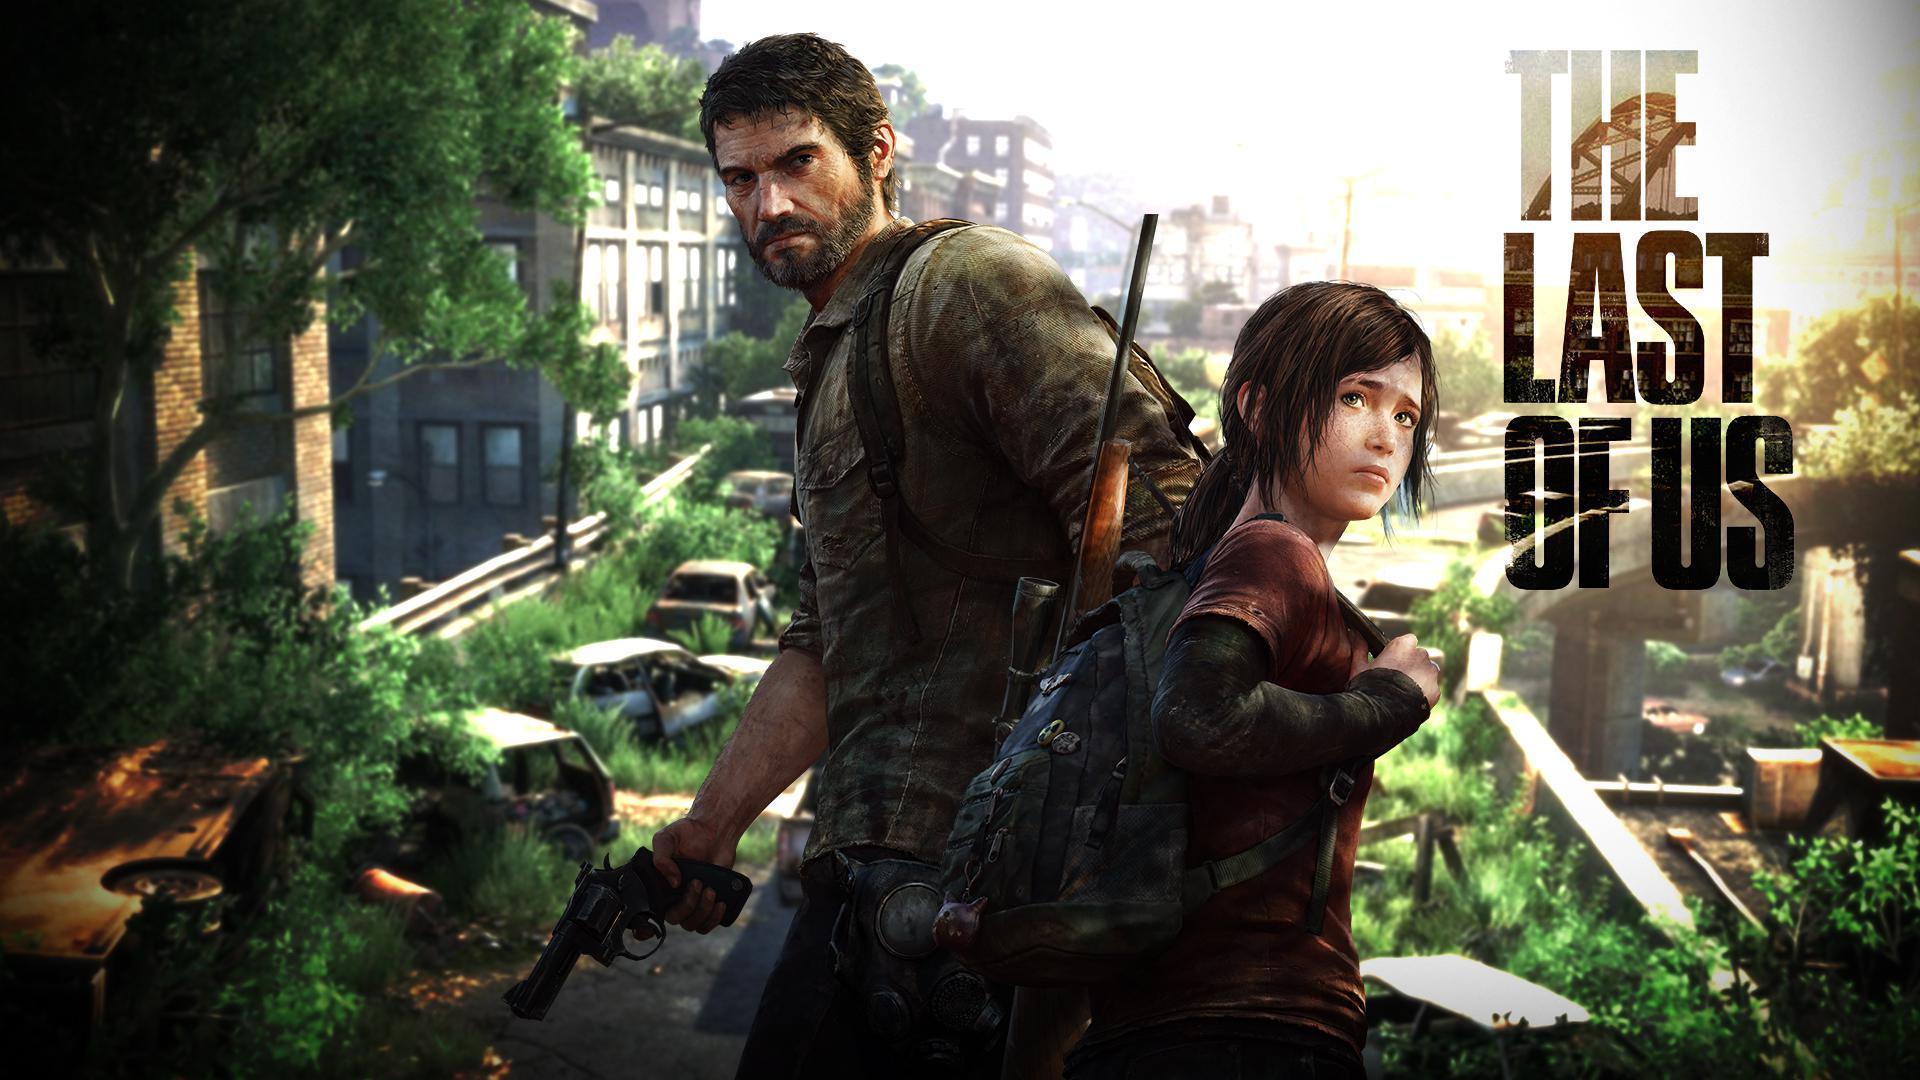 Quality The Last Of Us Wallpaper, Video Games